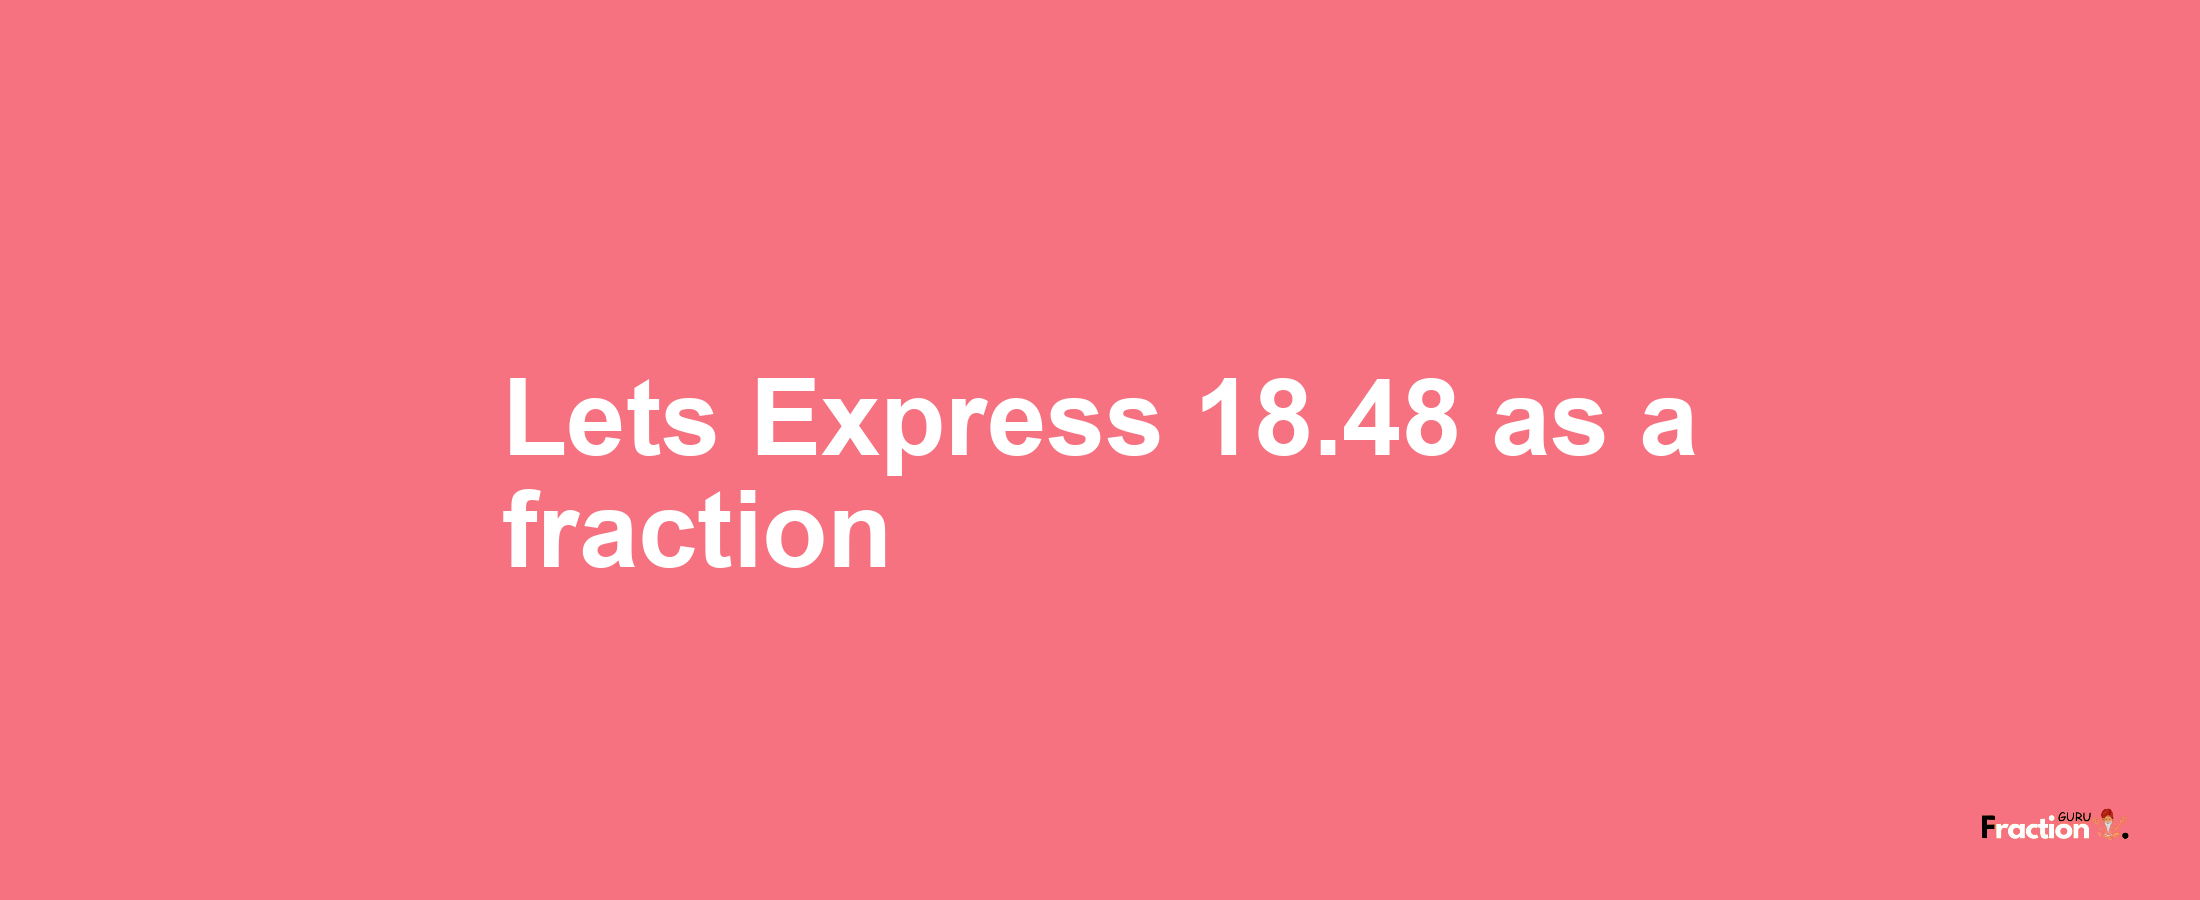 Lets Express 18.48 as afraction